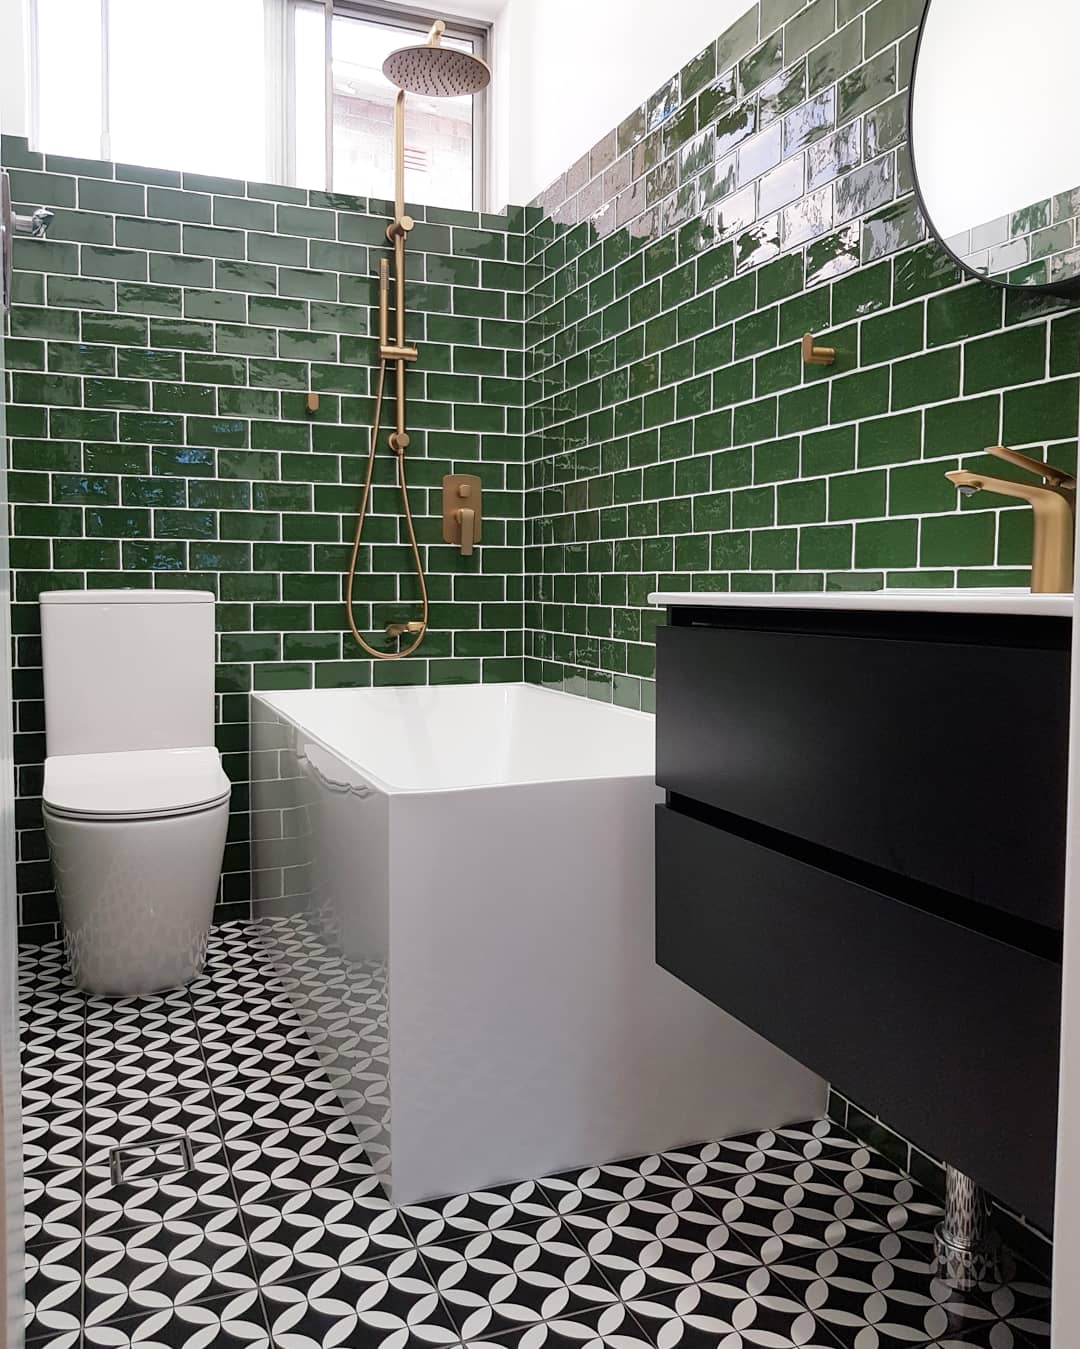 Bathroom design tips for small spaces